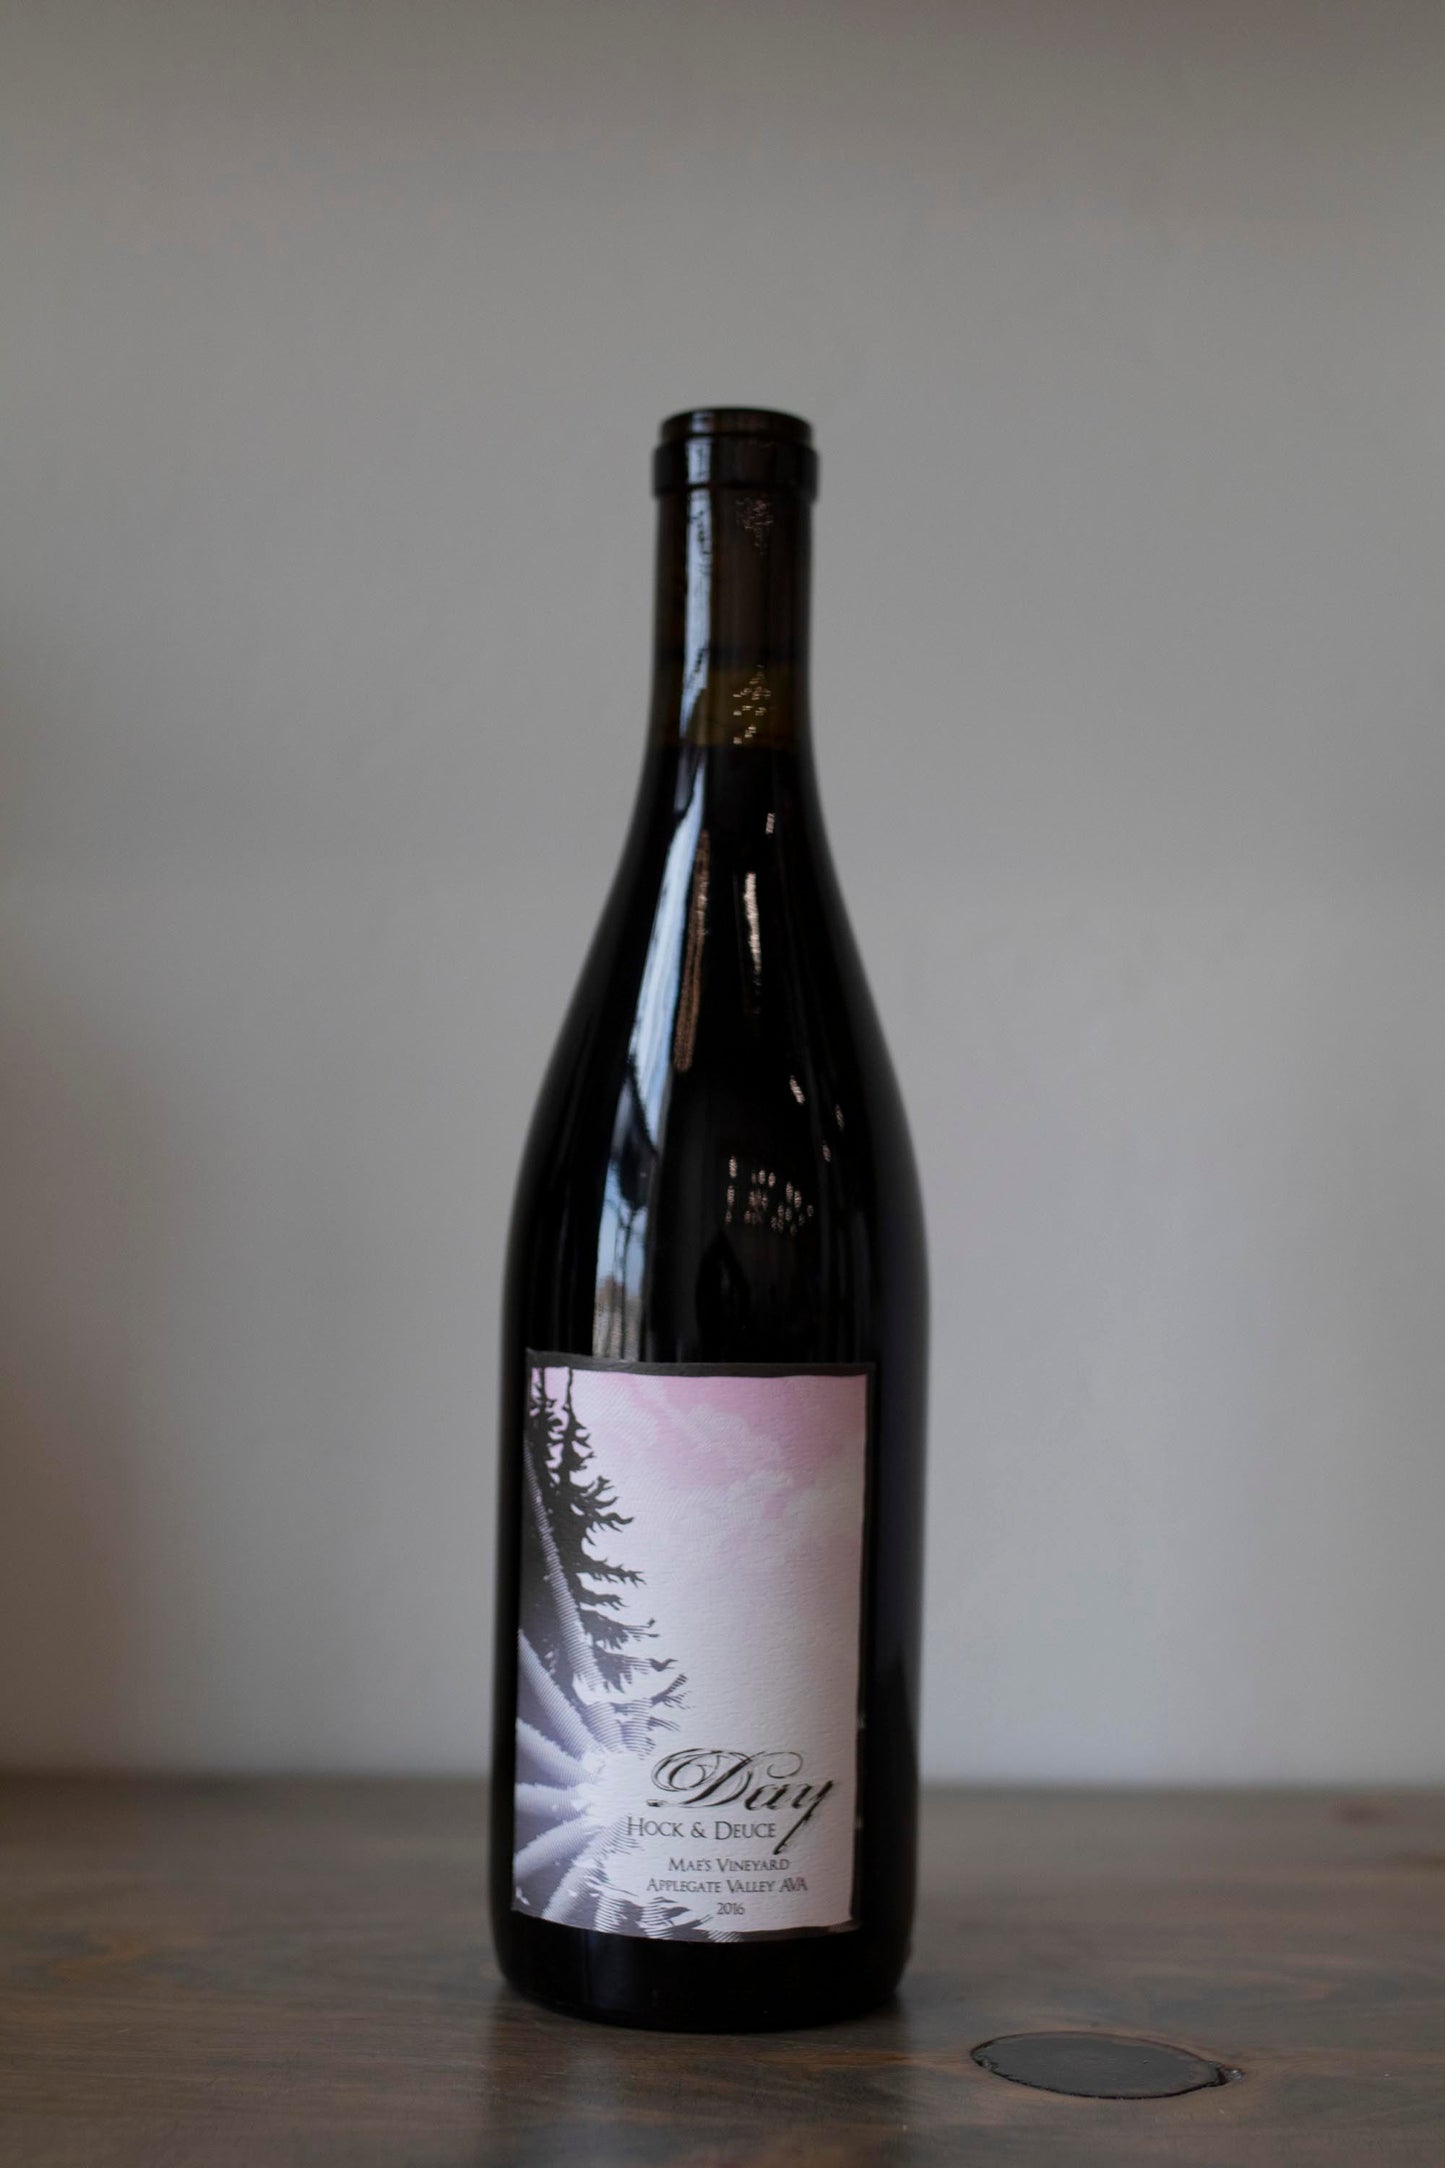 Bottle of Day Hock & Deuce Red Wine found at Vine & Board in 3809 NW 166th St Suite 1, Edmond, OK 73012